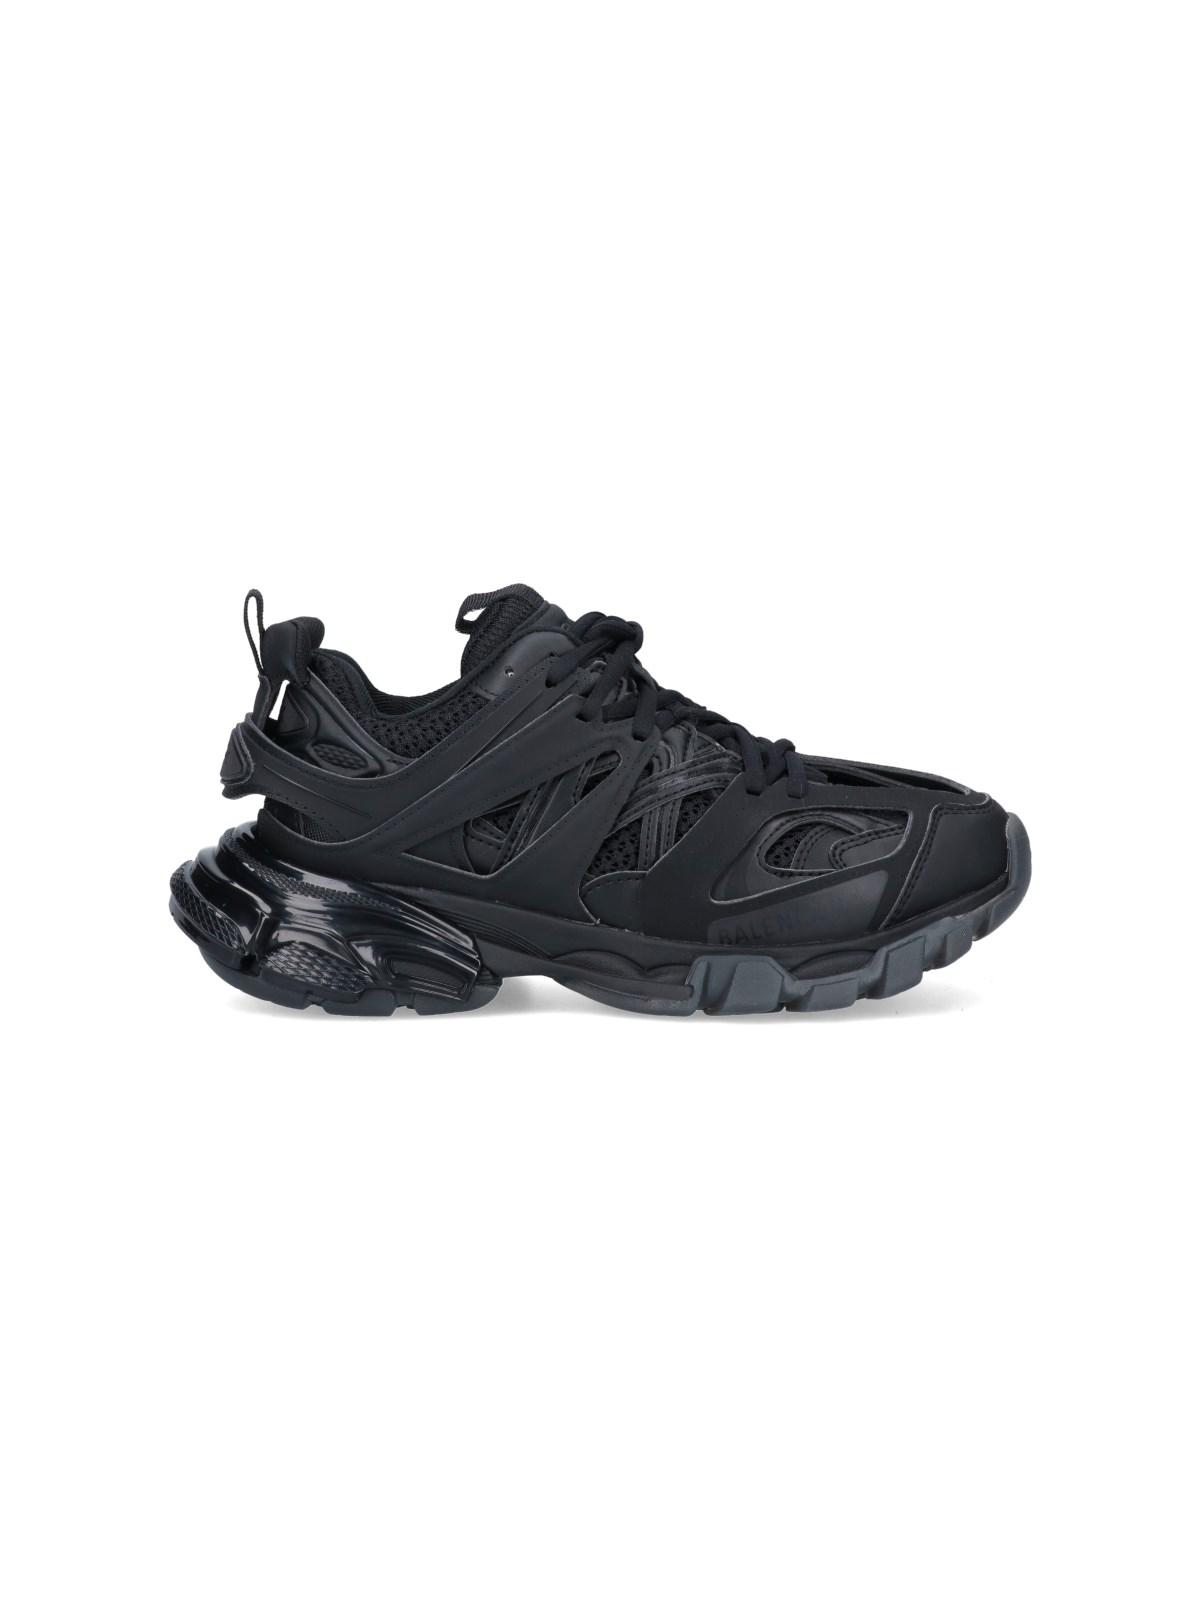 Balenciaga "track Clear Sole" Sneakers in Black | Lyst